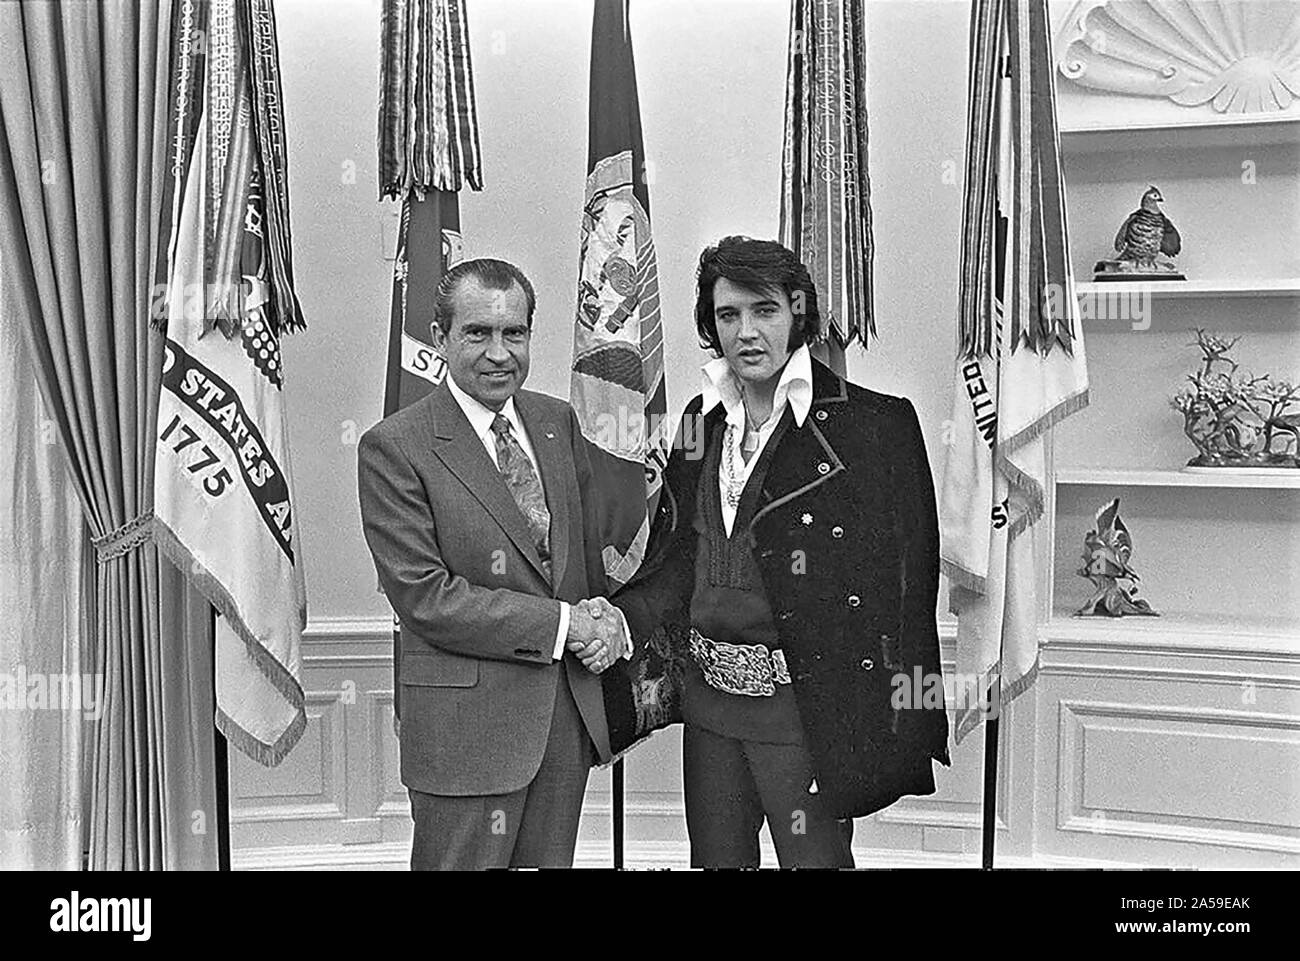 President Richard Nixon shaking hands with singer Elvis Presley in the White House ca. 1970s Stock Photo